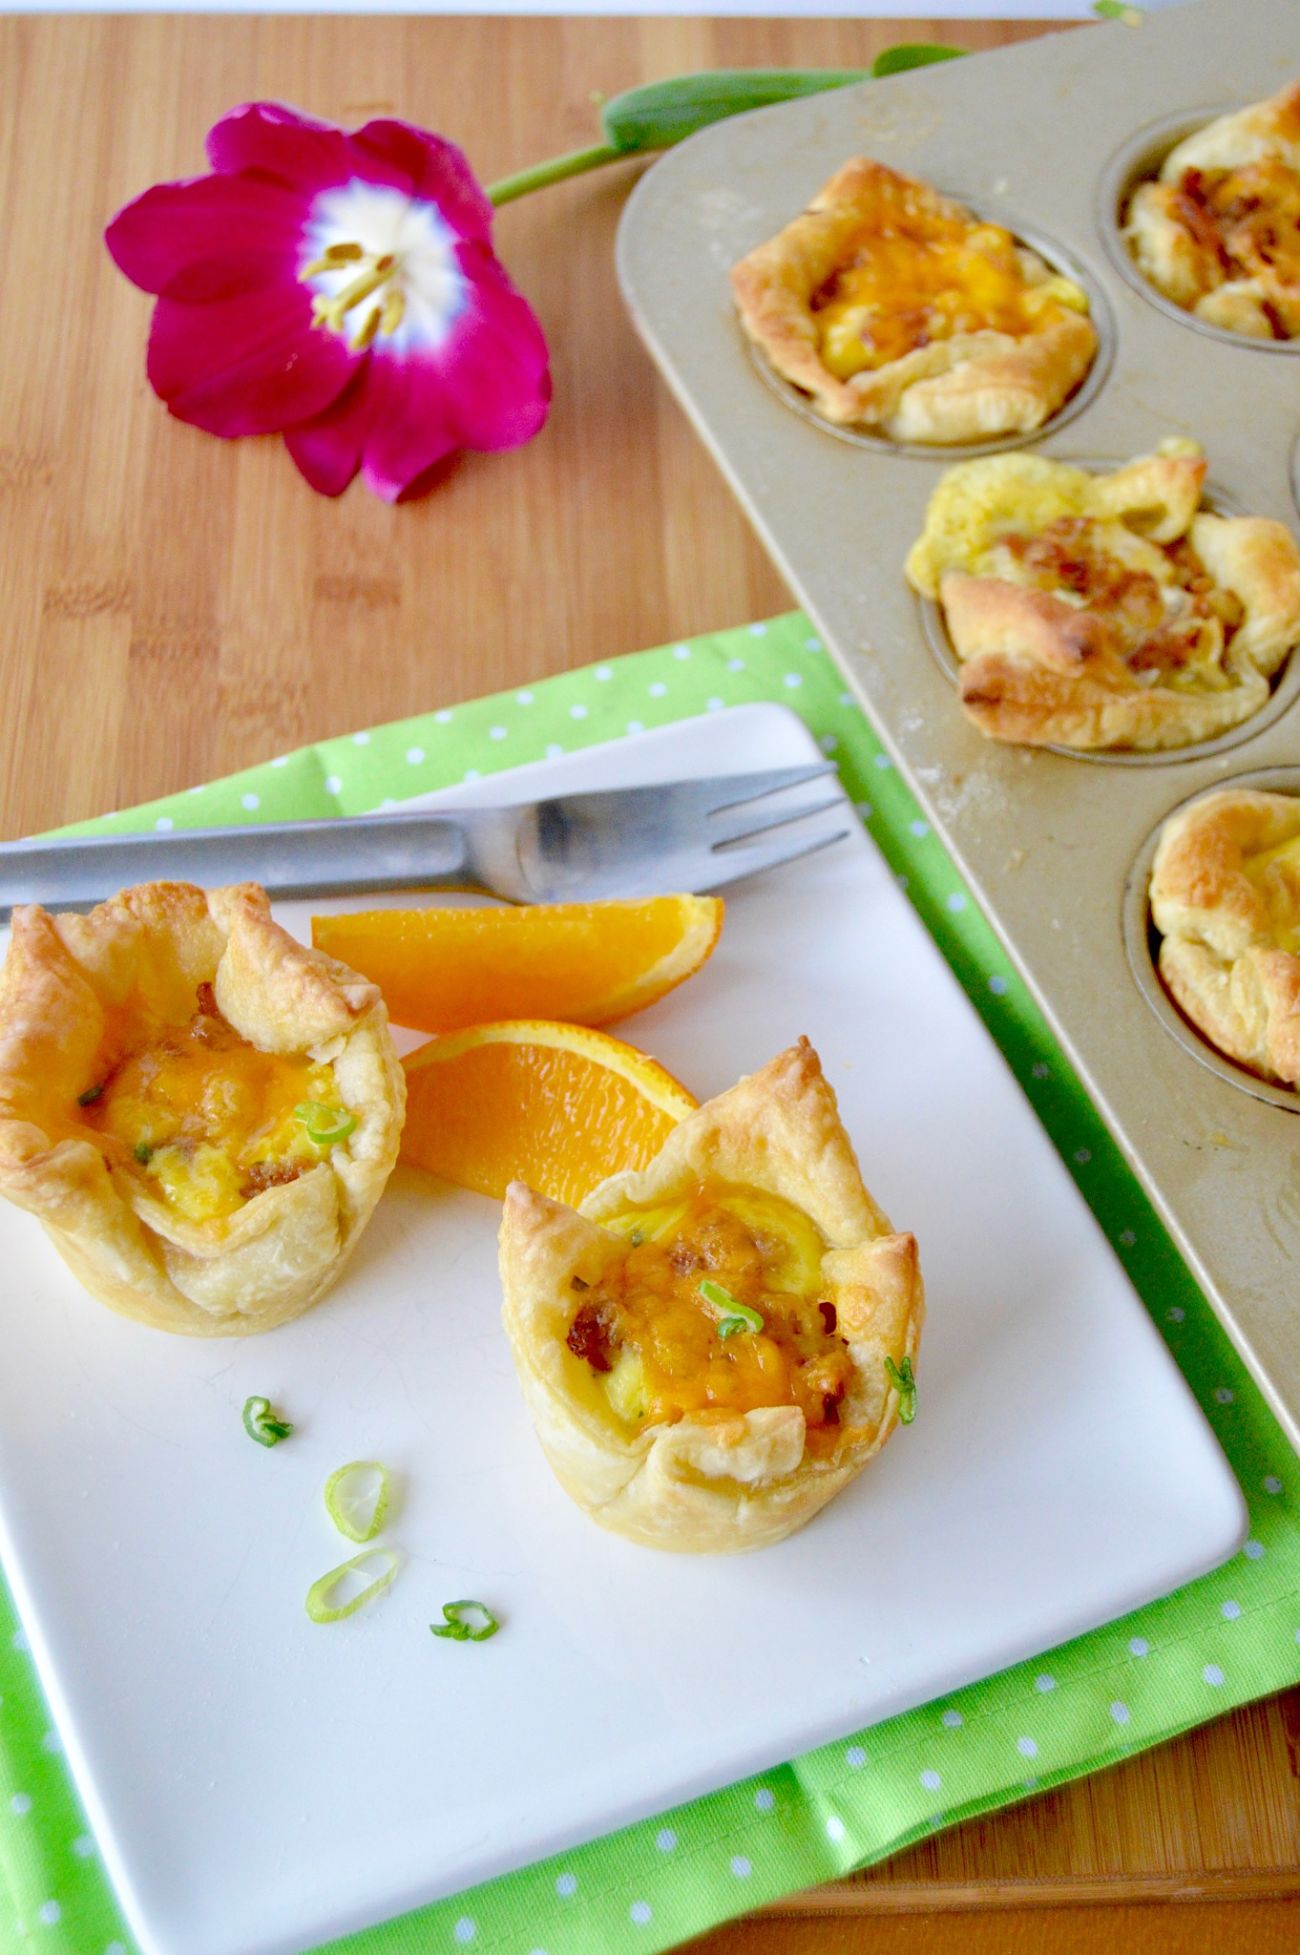 These Loaded breakfast cups are packed full of flavor. They include Sausage, cheese, eggs and hash browns. All in one puff pastry shell. Serve them for breakfast and save any leftovers for snacks!